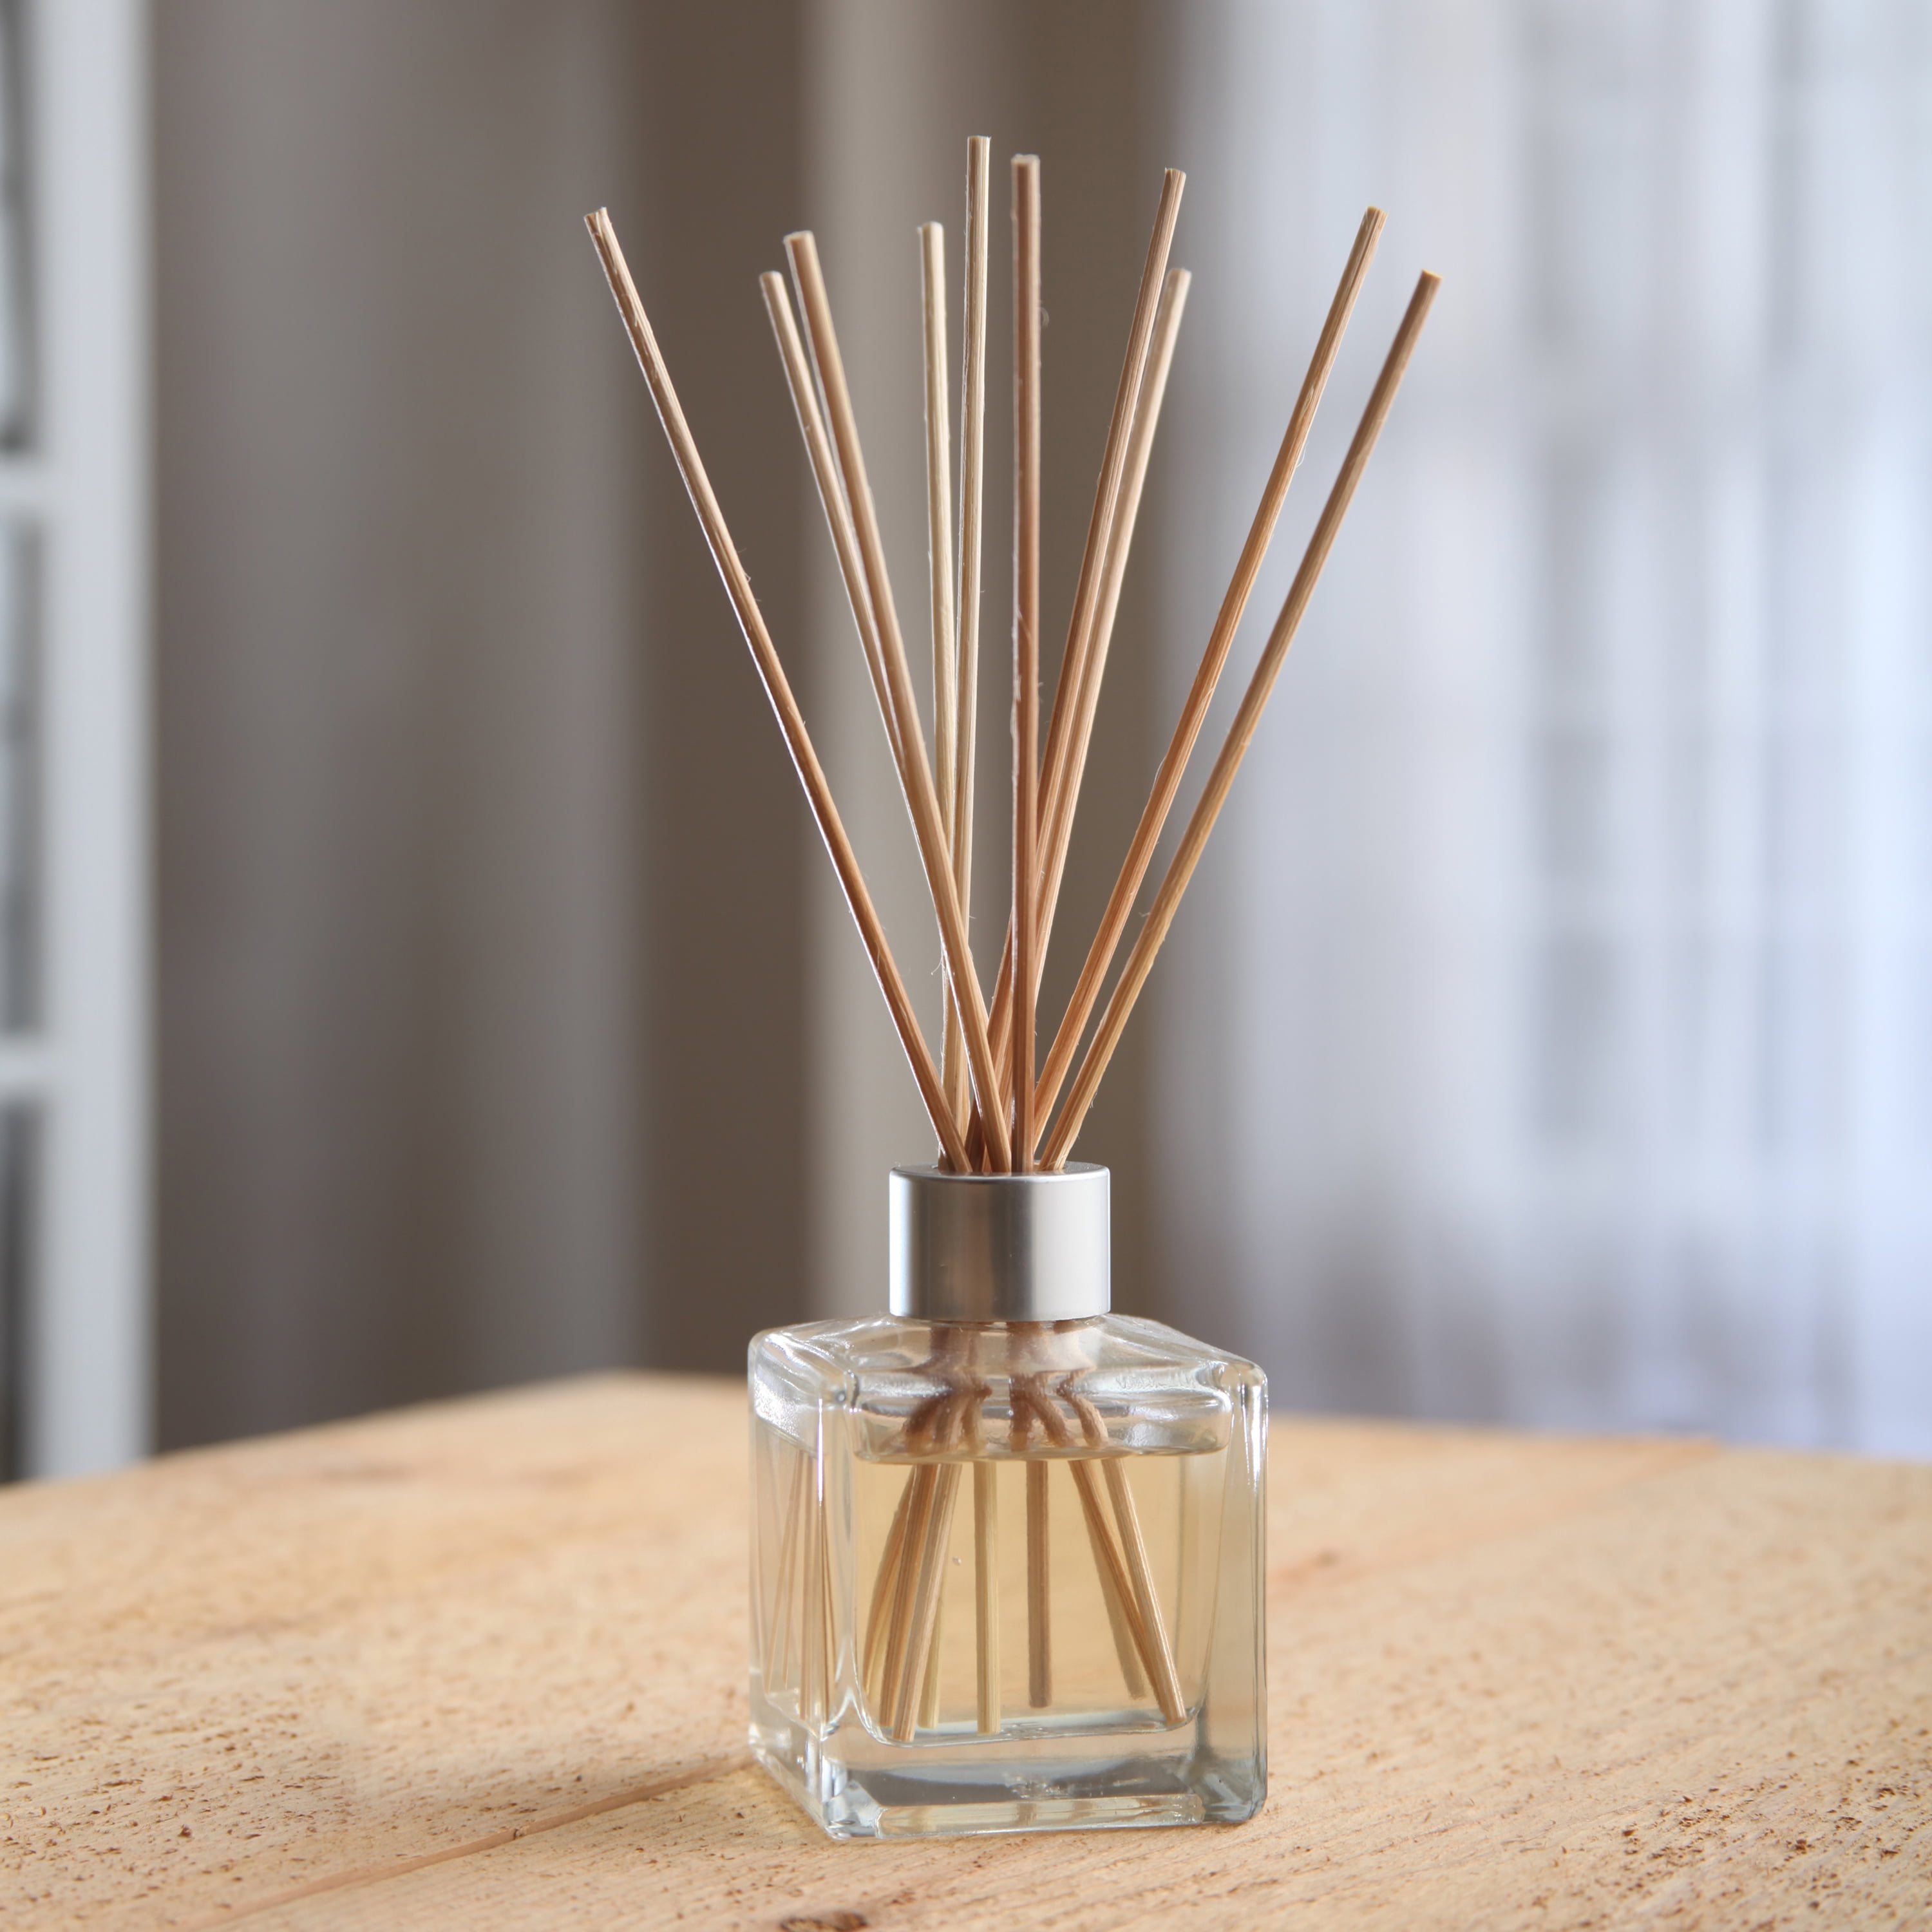 Custom 100ml empty reed diffuser glass bottle with sticks